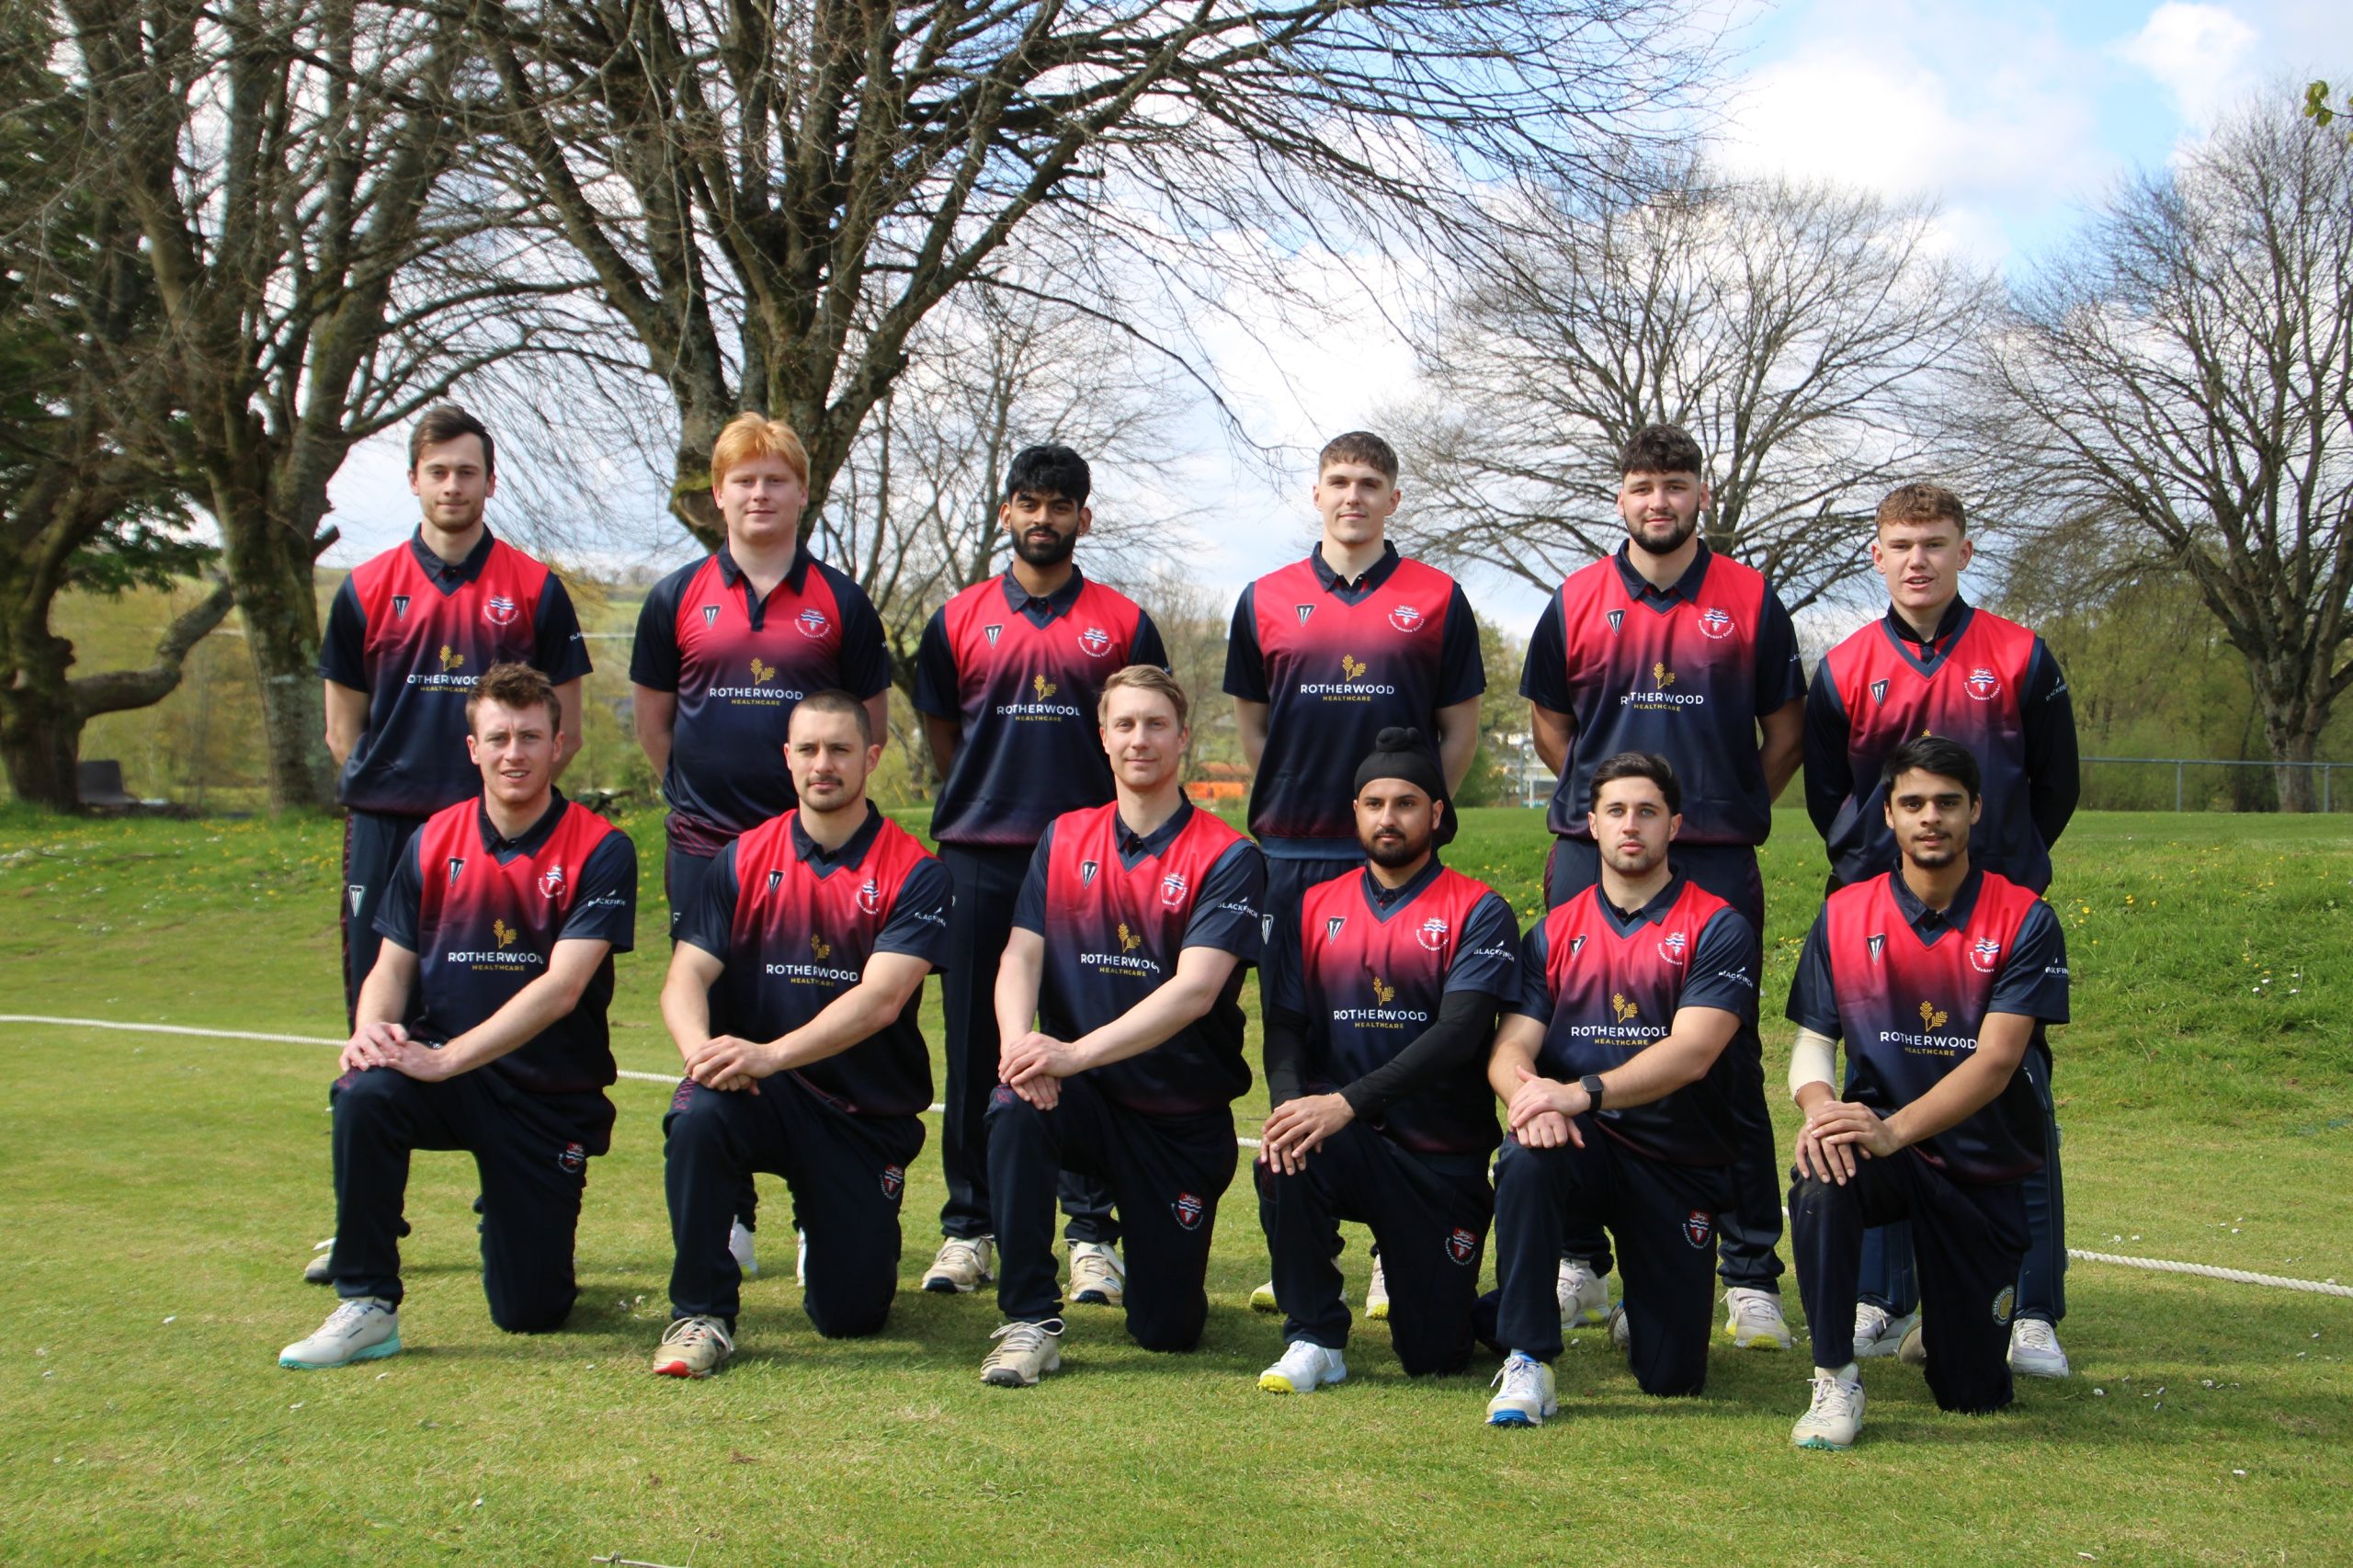 CRICKET | Two 19-year-olds star as Herefordshire gain success in their NCCA T20 double-header with Wales